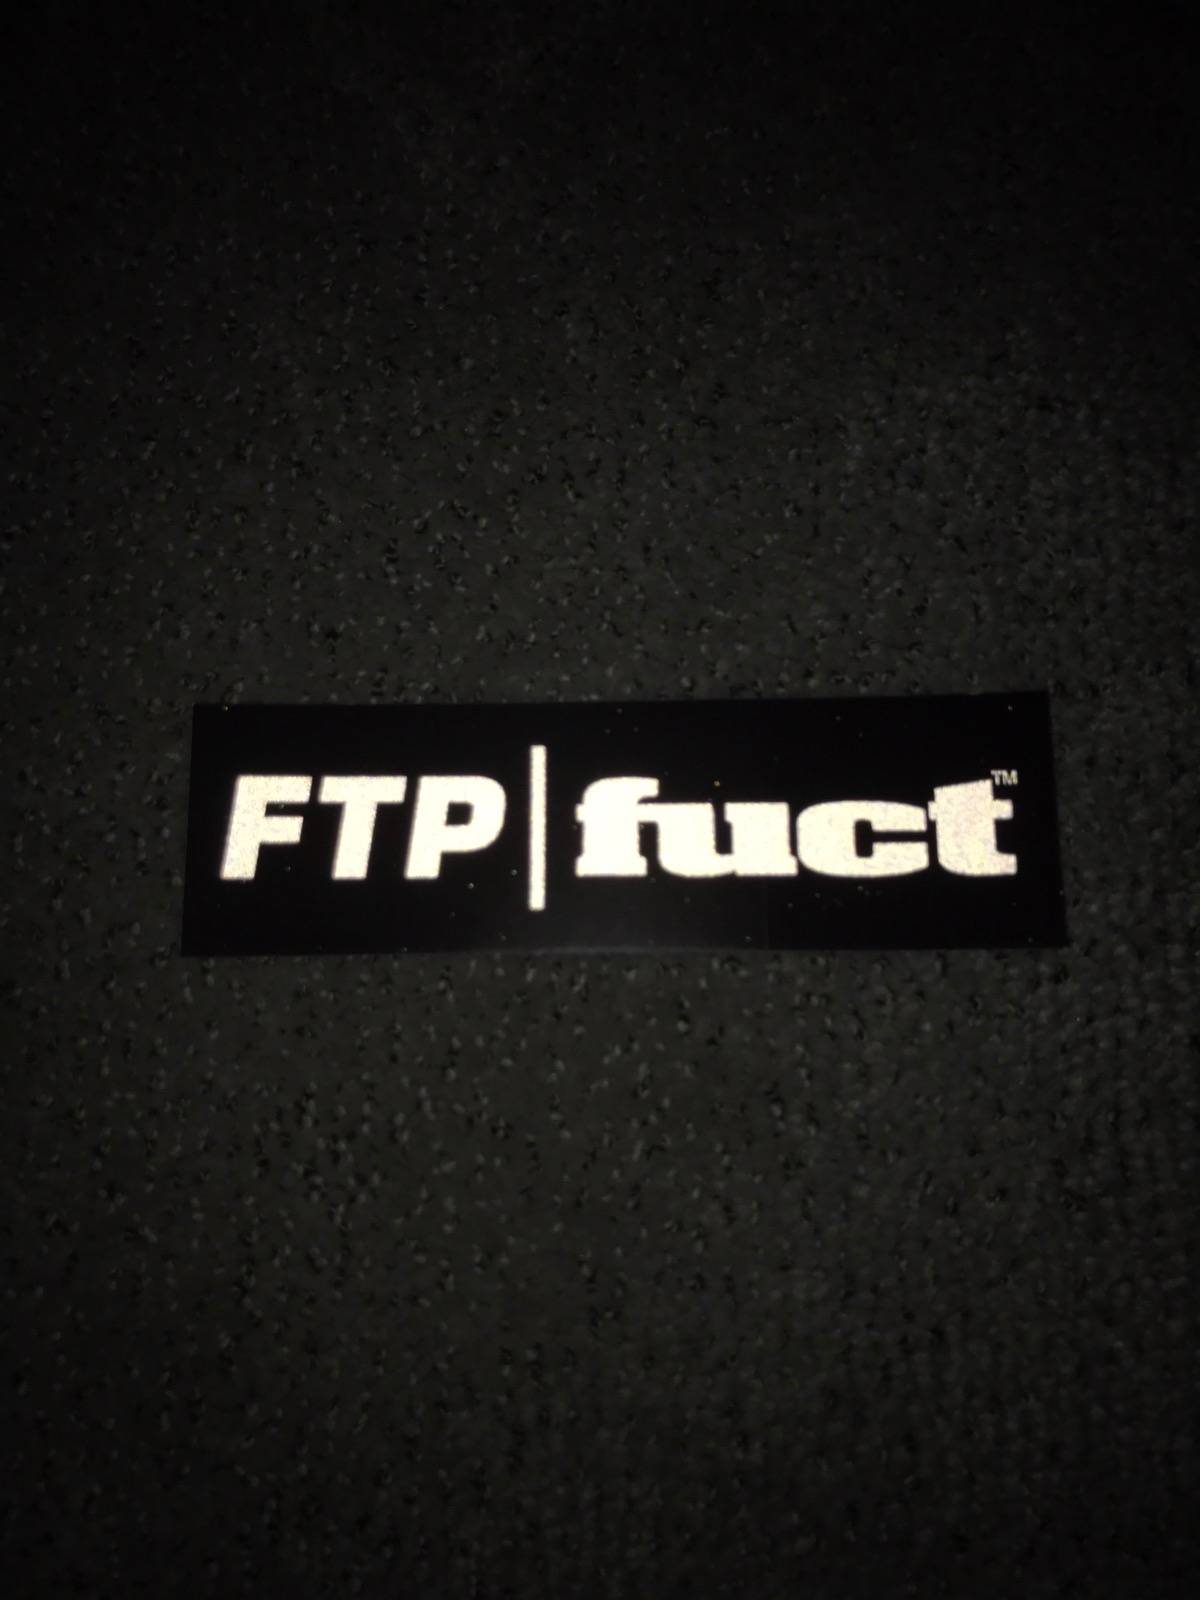 Fuct Logo - Fuct Ftp X Fuct Logo Sticker Size one size - Miscellaneous for Sale ...